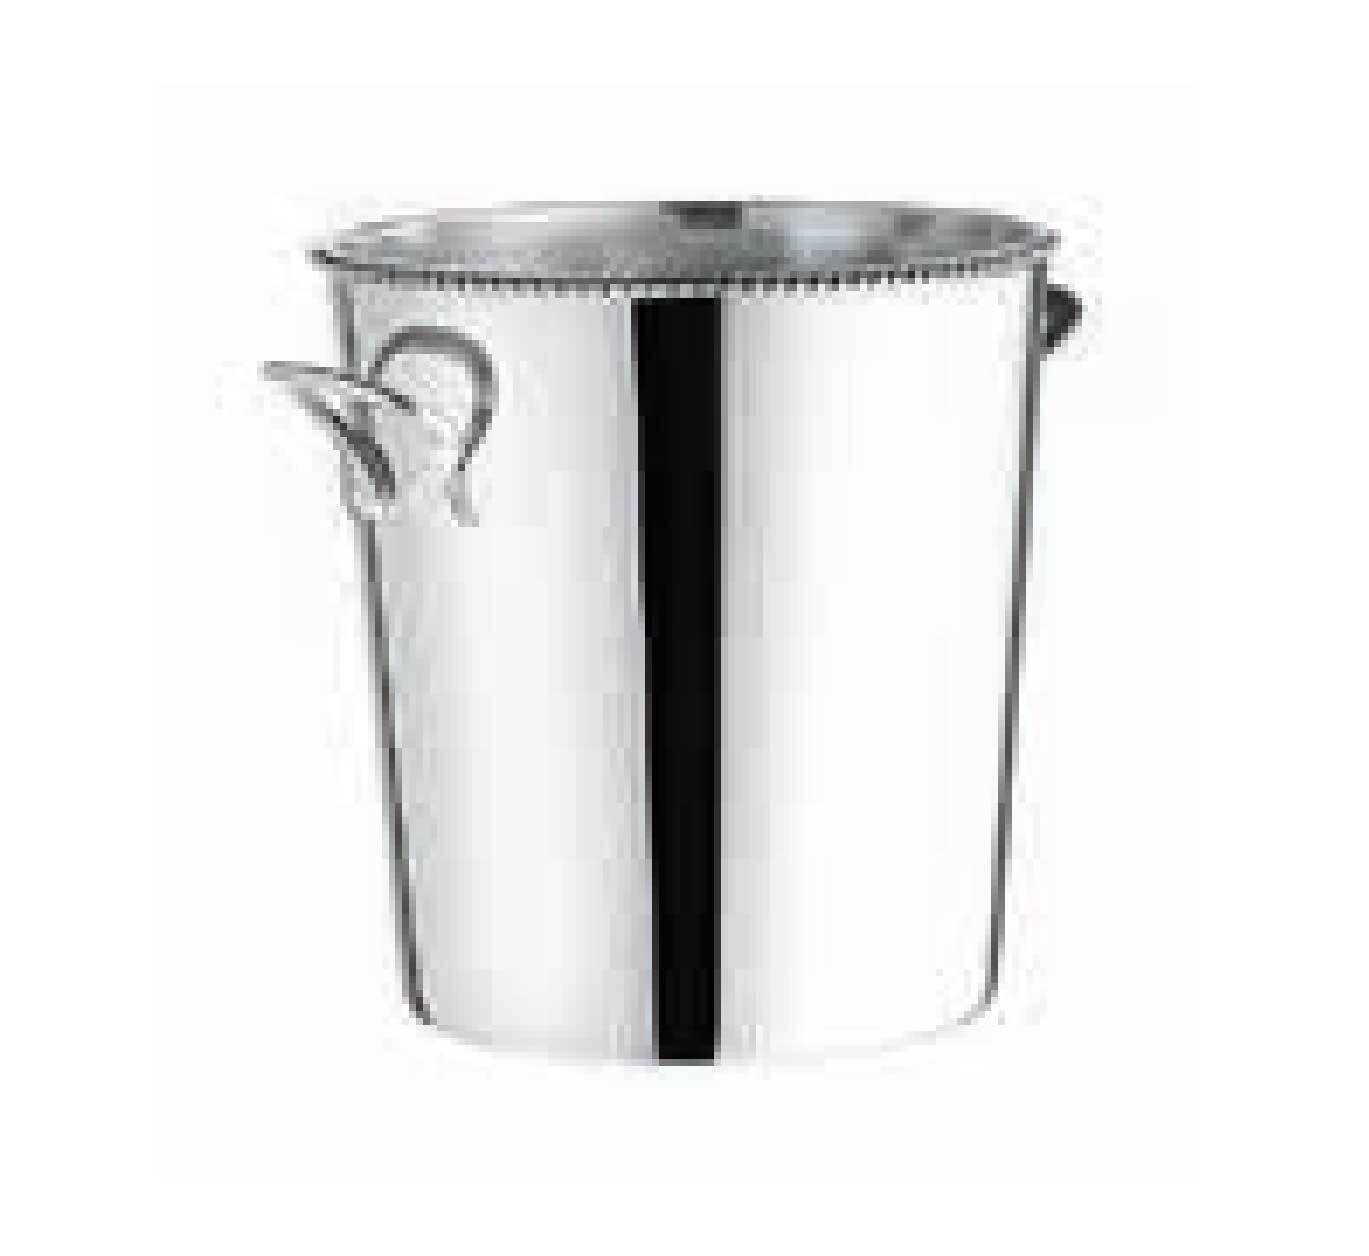 Ercuis Lauriers Champagne Bucket 7.875 Inch Silver Plated F51L101-20